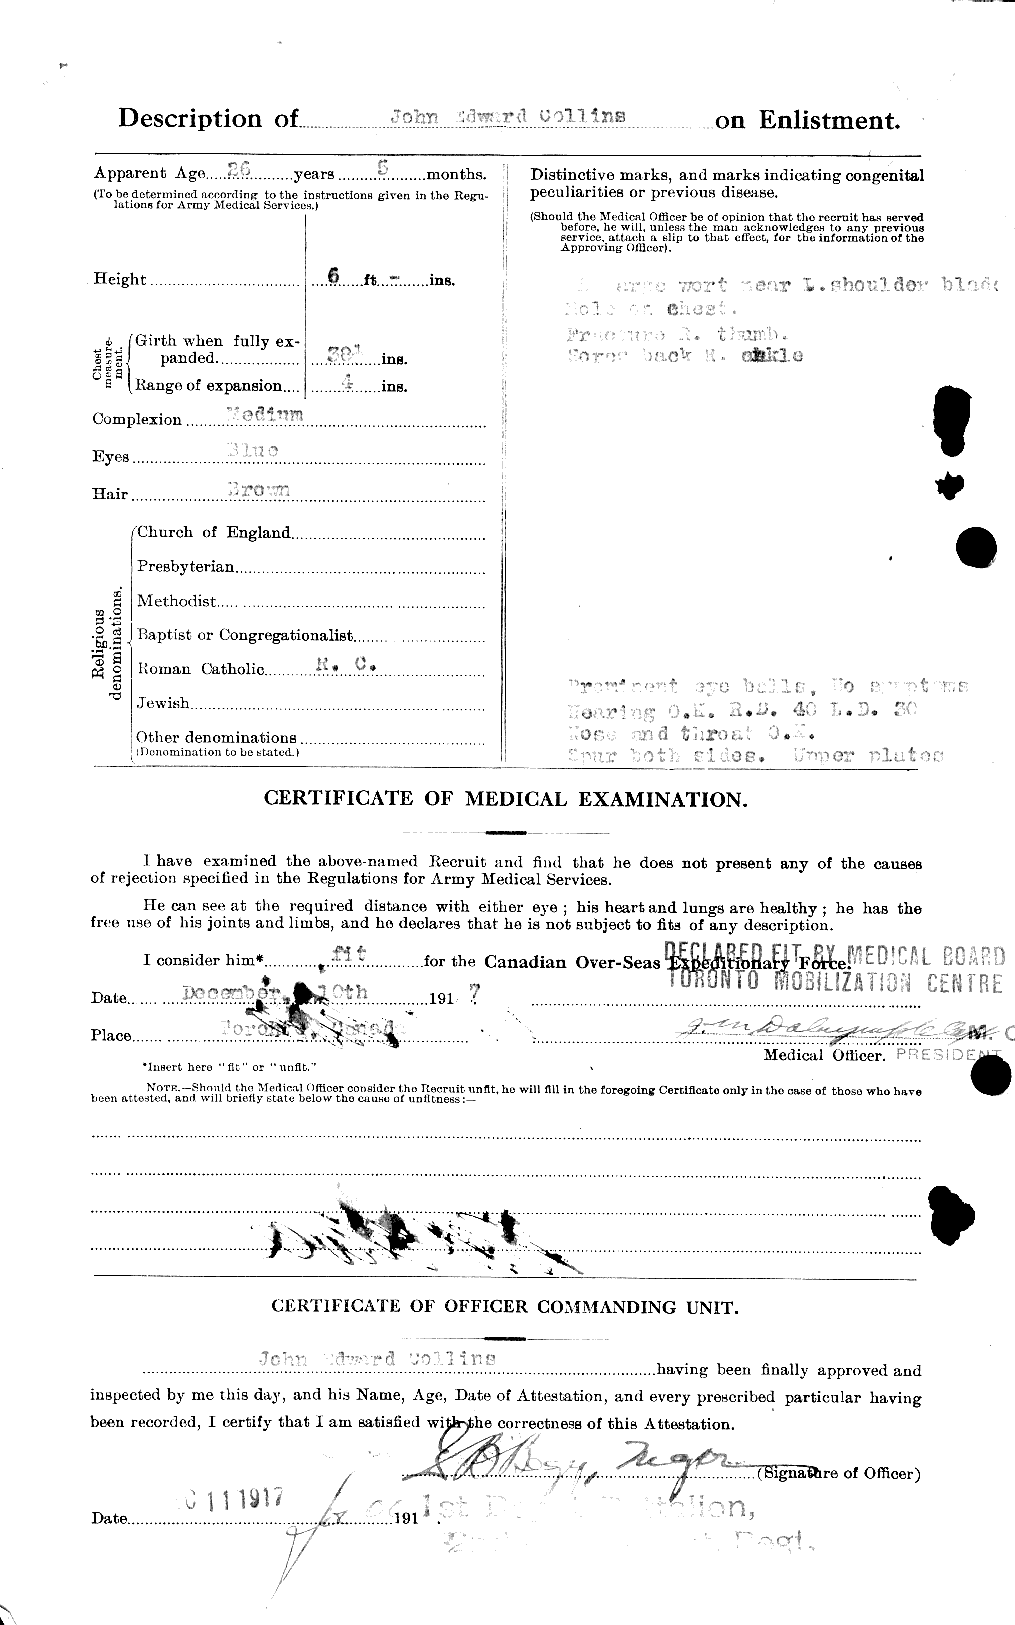 Personnel Records of the First World War - CEF 034349b